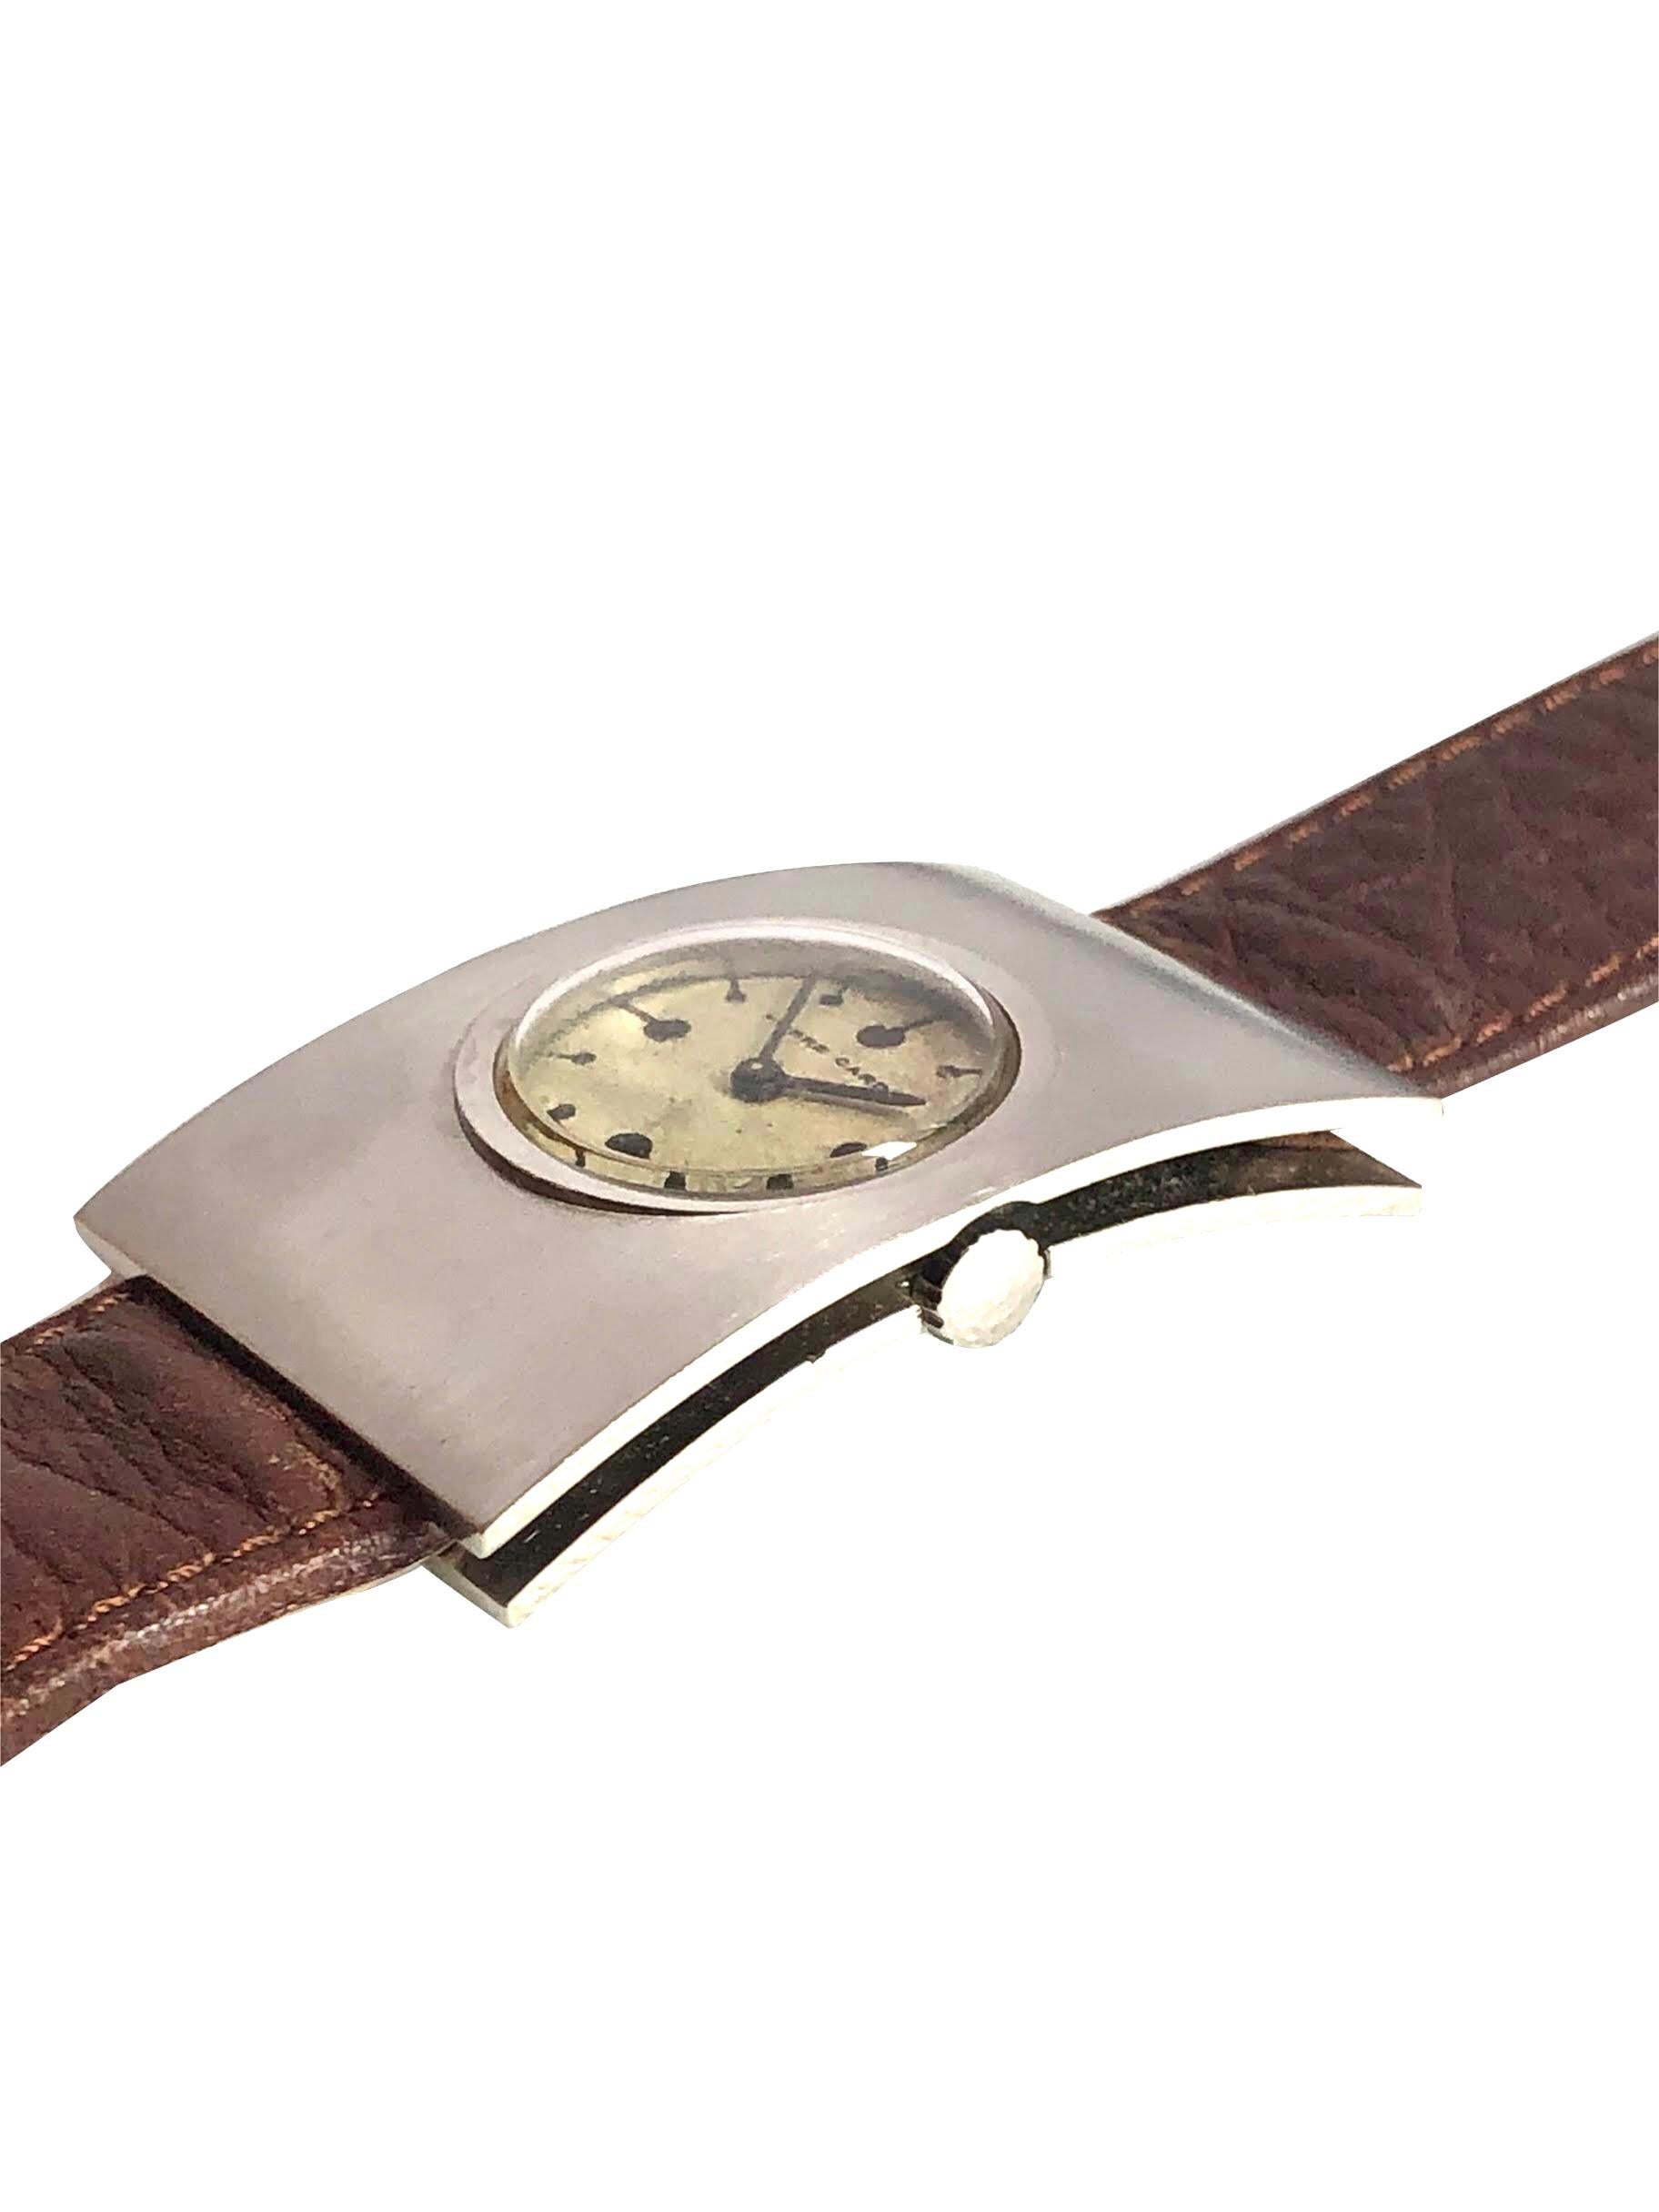 Circa 1970s Mid Century Wrist Watch for Pierre Cardin, 47 X 30 M.M. Stainless Steel 3 piece case. Jaeger LeCoultre 17 Jewel Mechanical, Manual Wind movement, original silver satin dial. Newer Brown Leather strap with original Steel Buckle. Watch